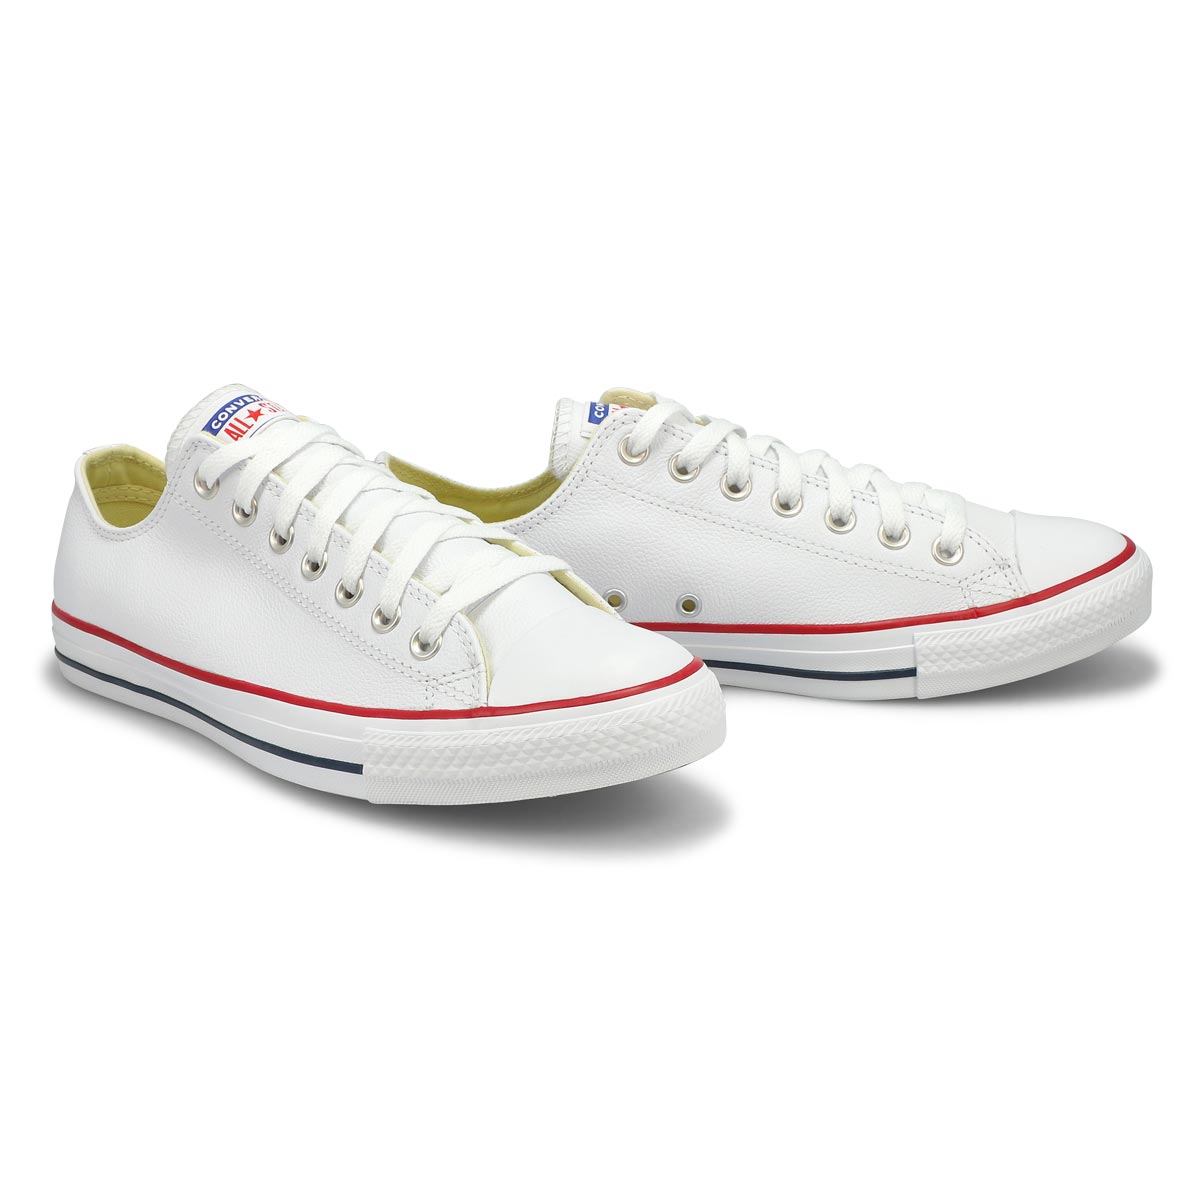 Converse Chuck Taylor All Star Leather | SoftMoc.com